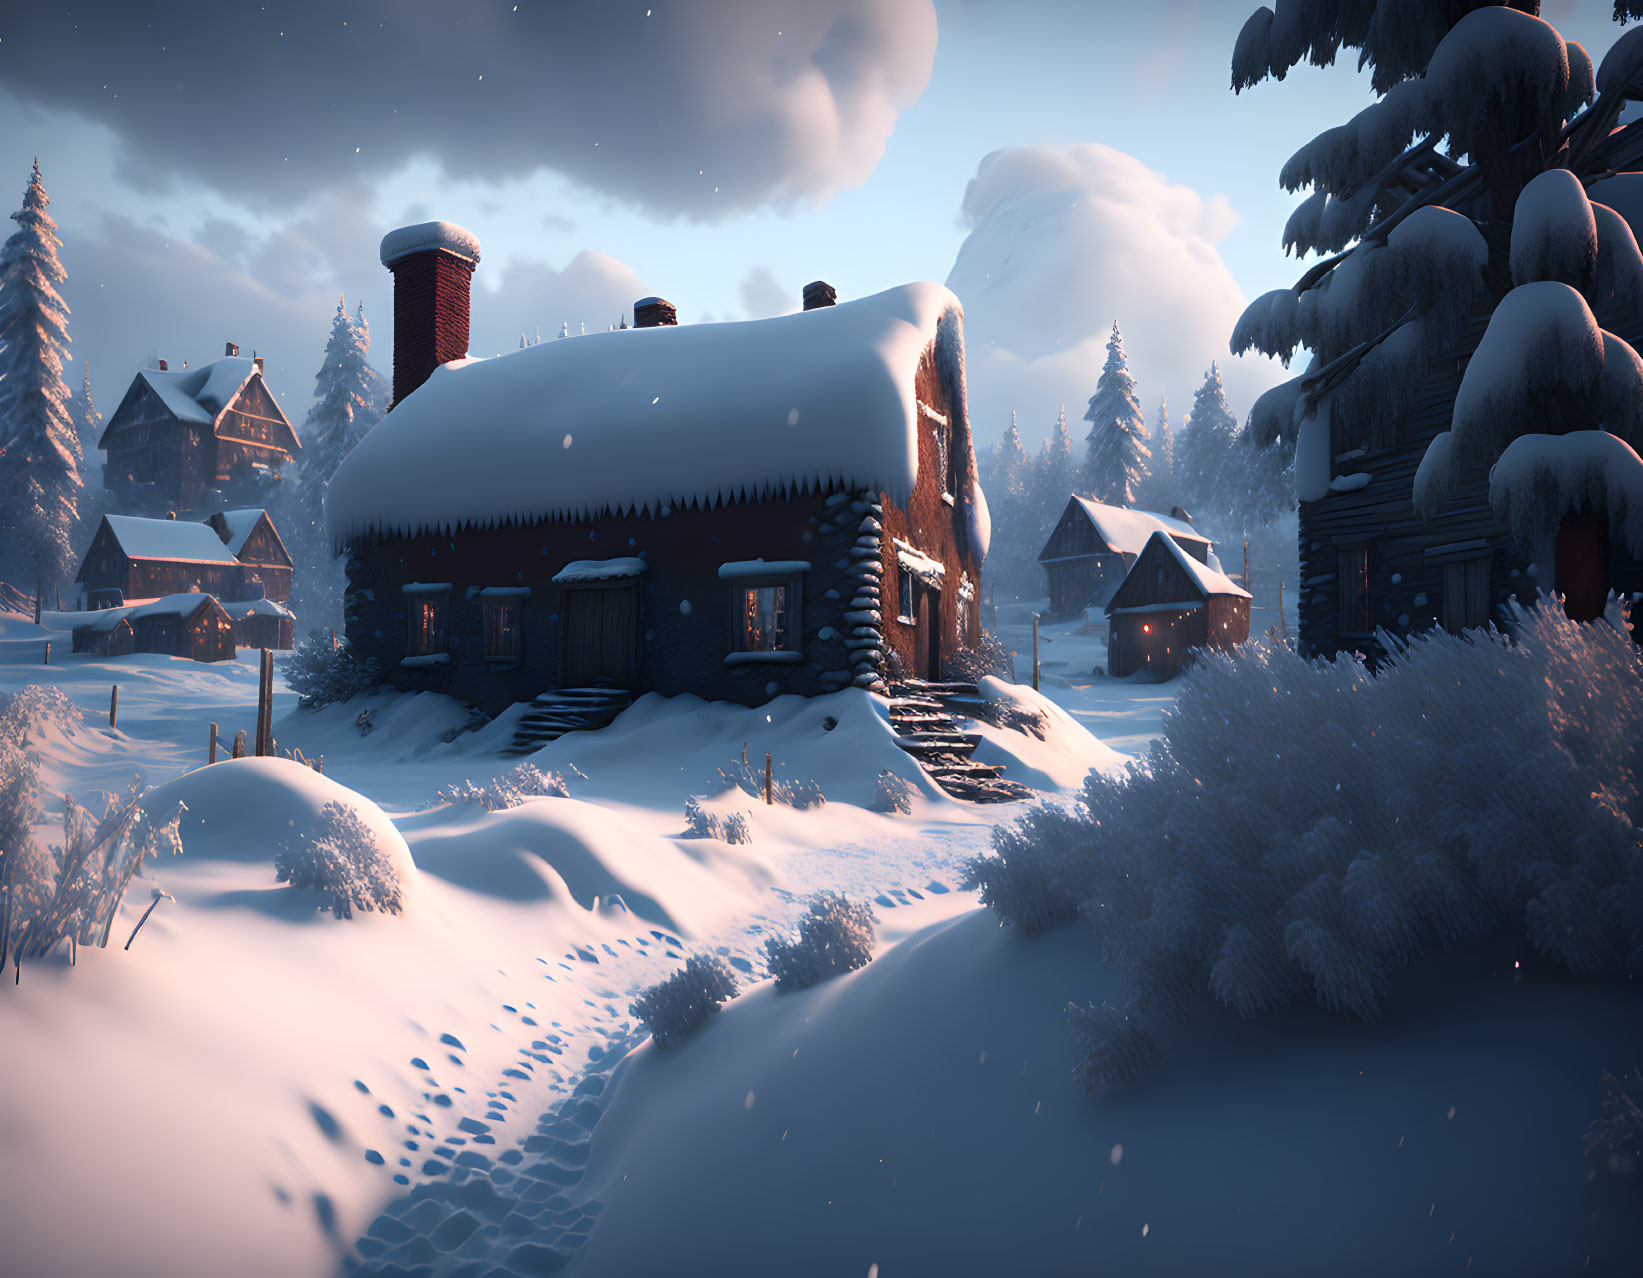 Snowy Winter Scene: Cozy Cottage in Tranquil Village at Dusk